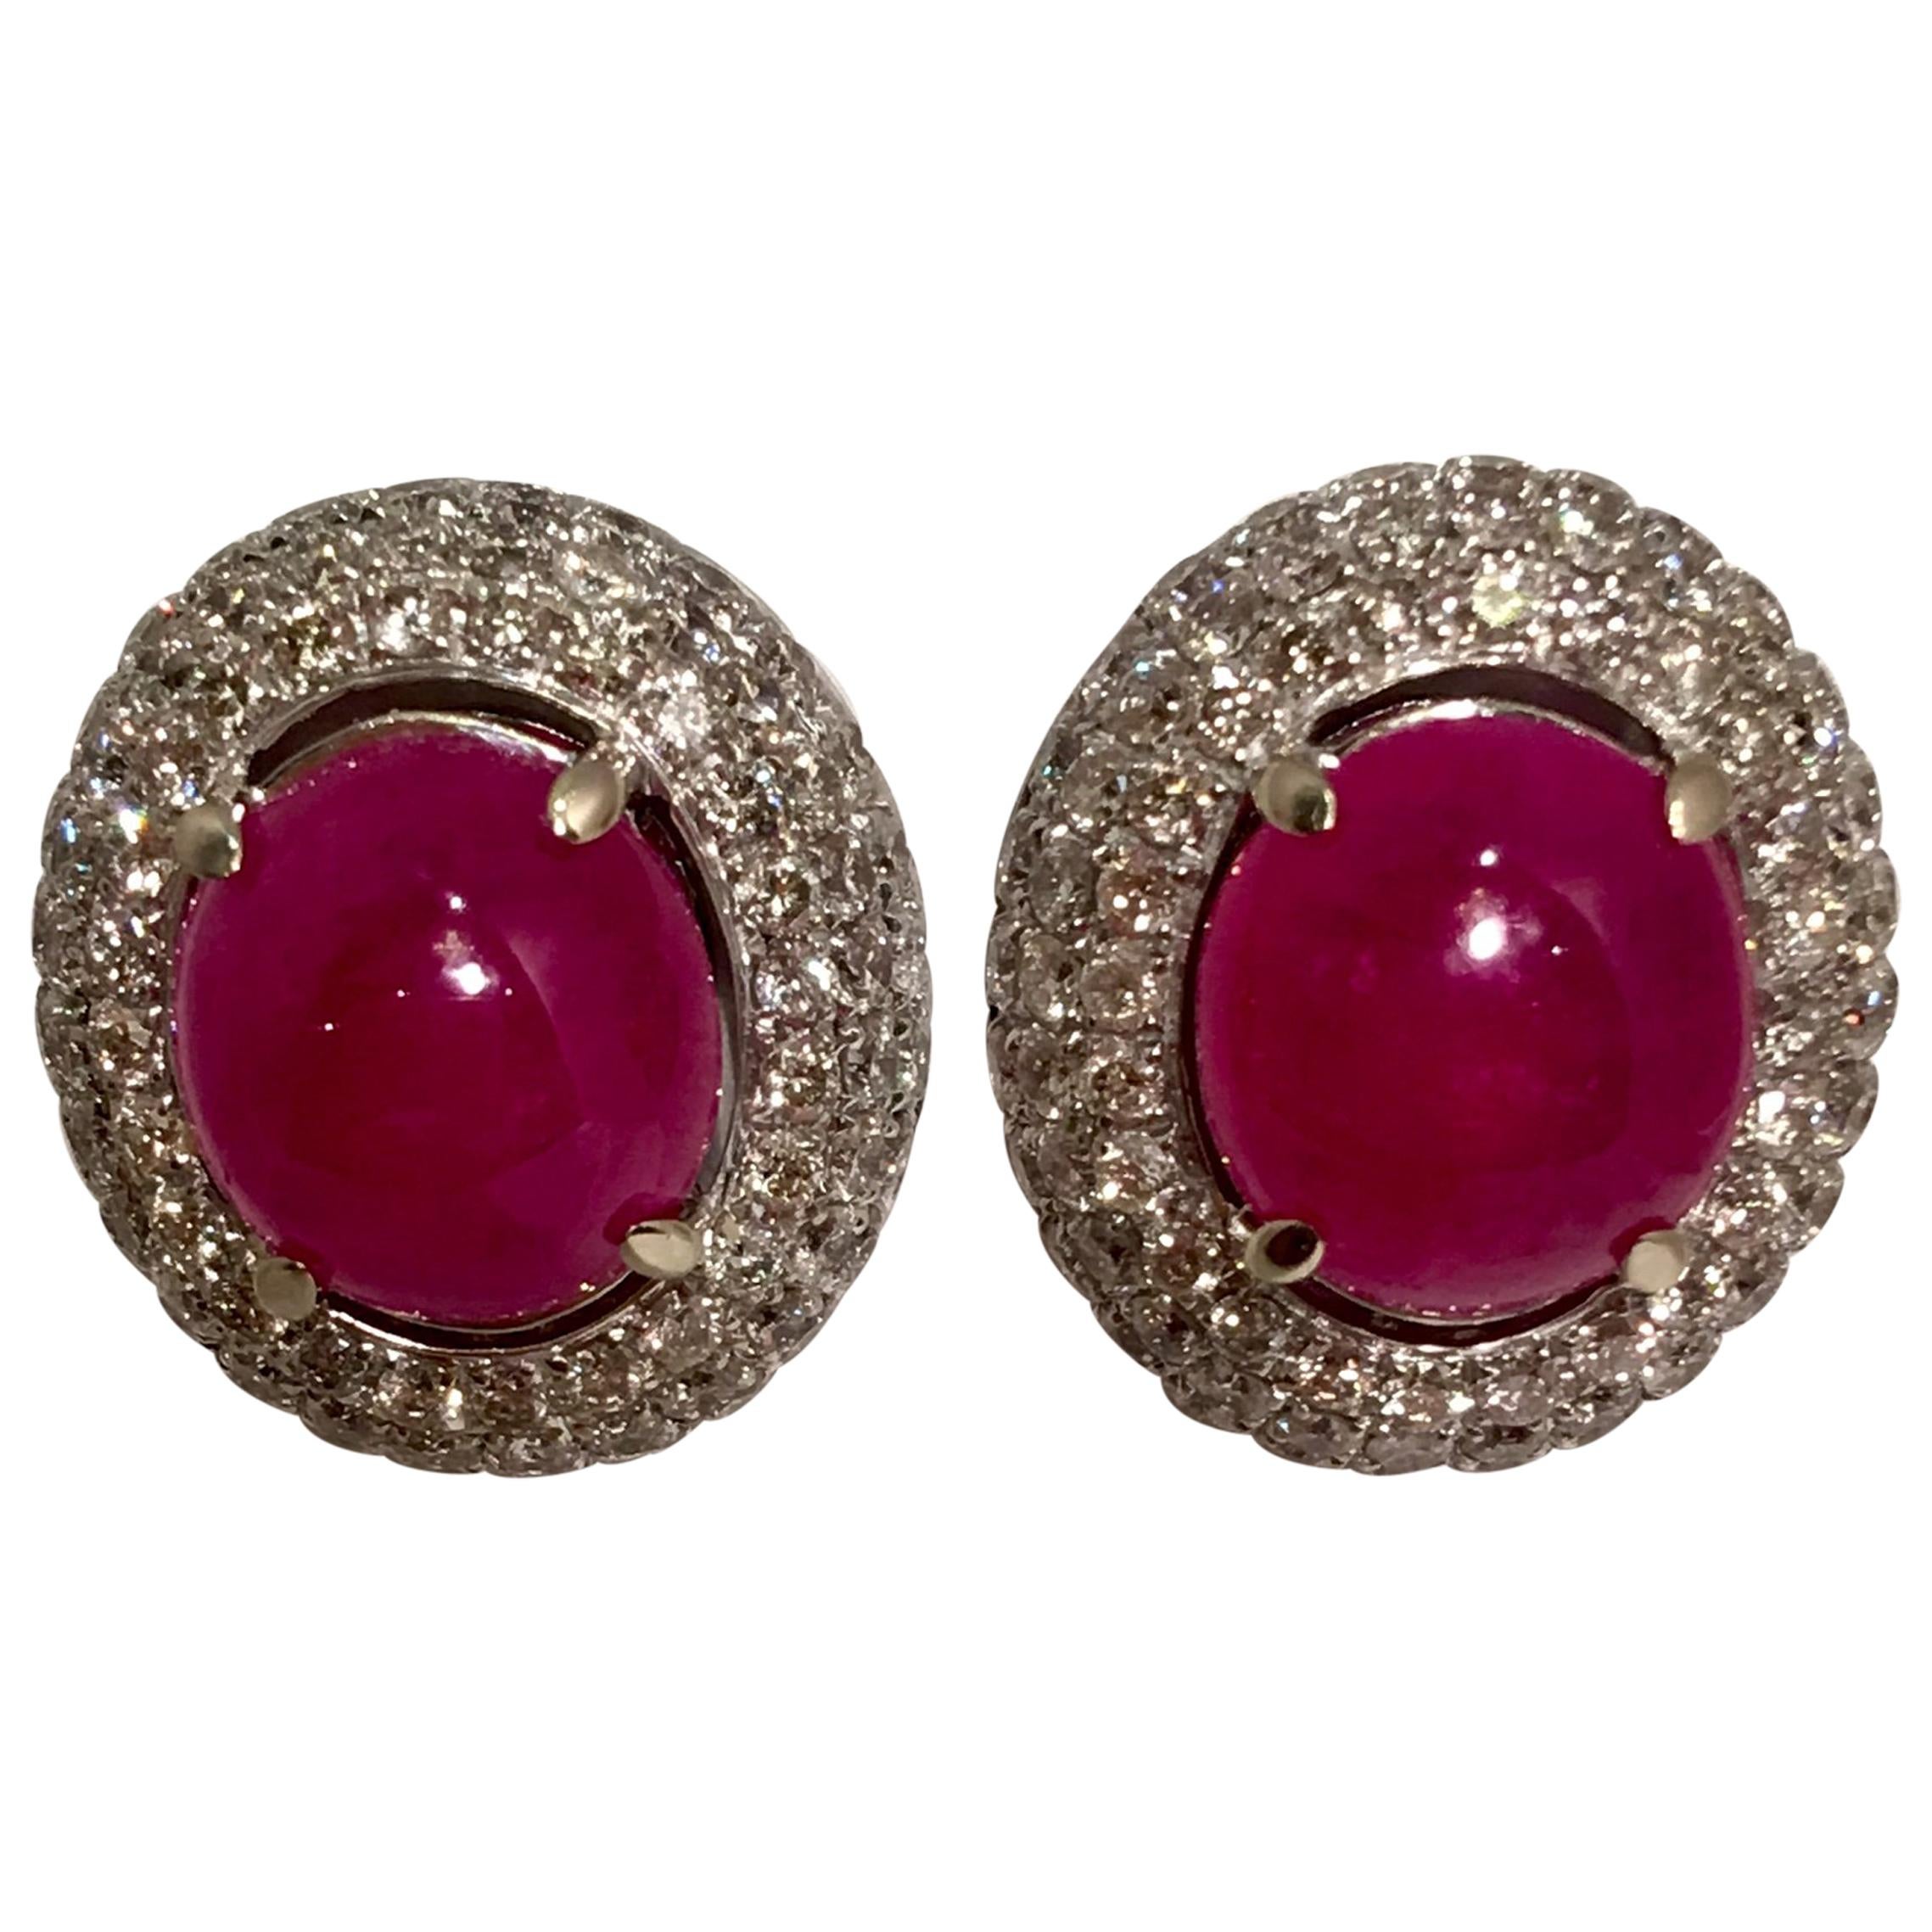 2.6 Carat Cabochon Ruby Diamond Drop Earrings For Sale at 1stDibs